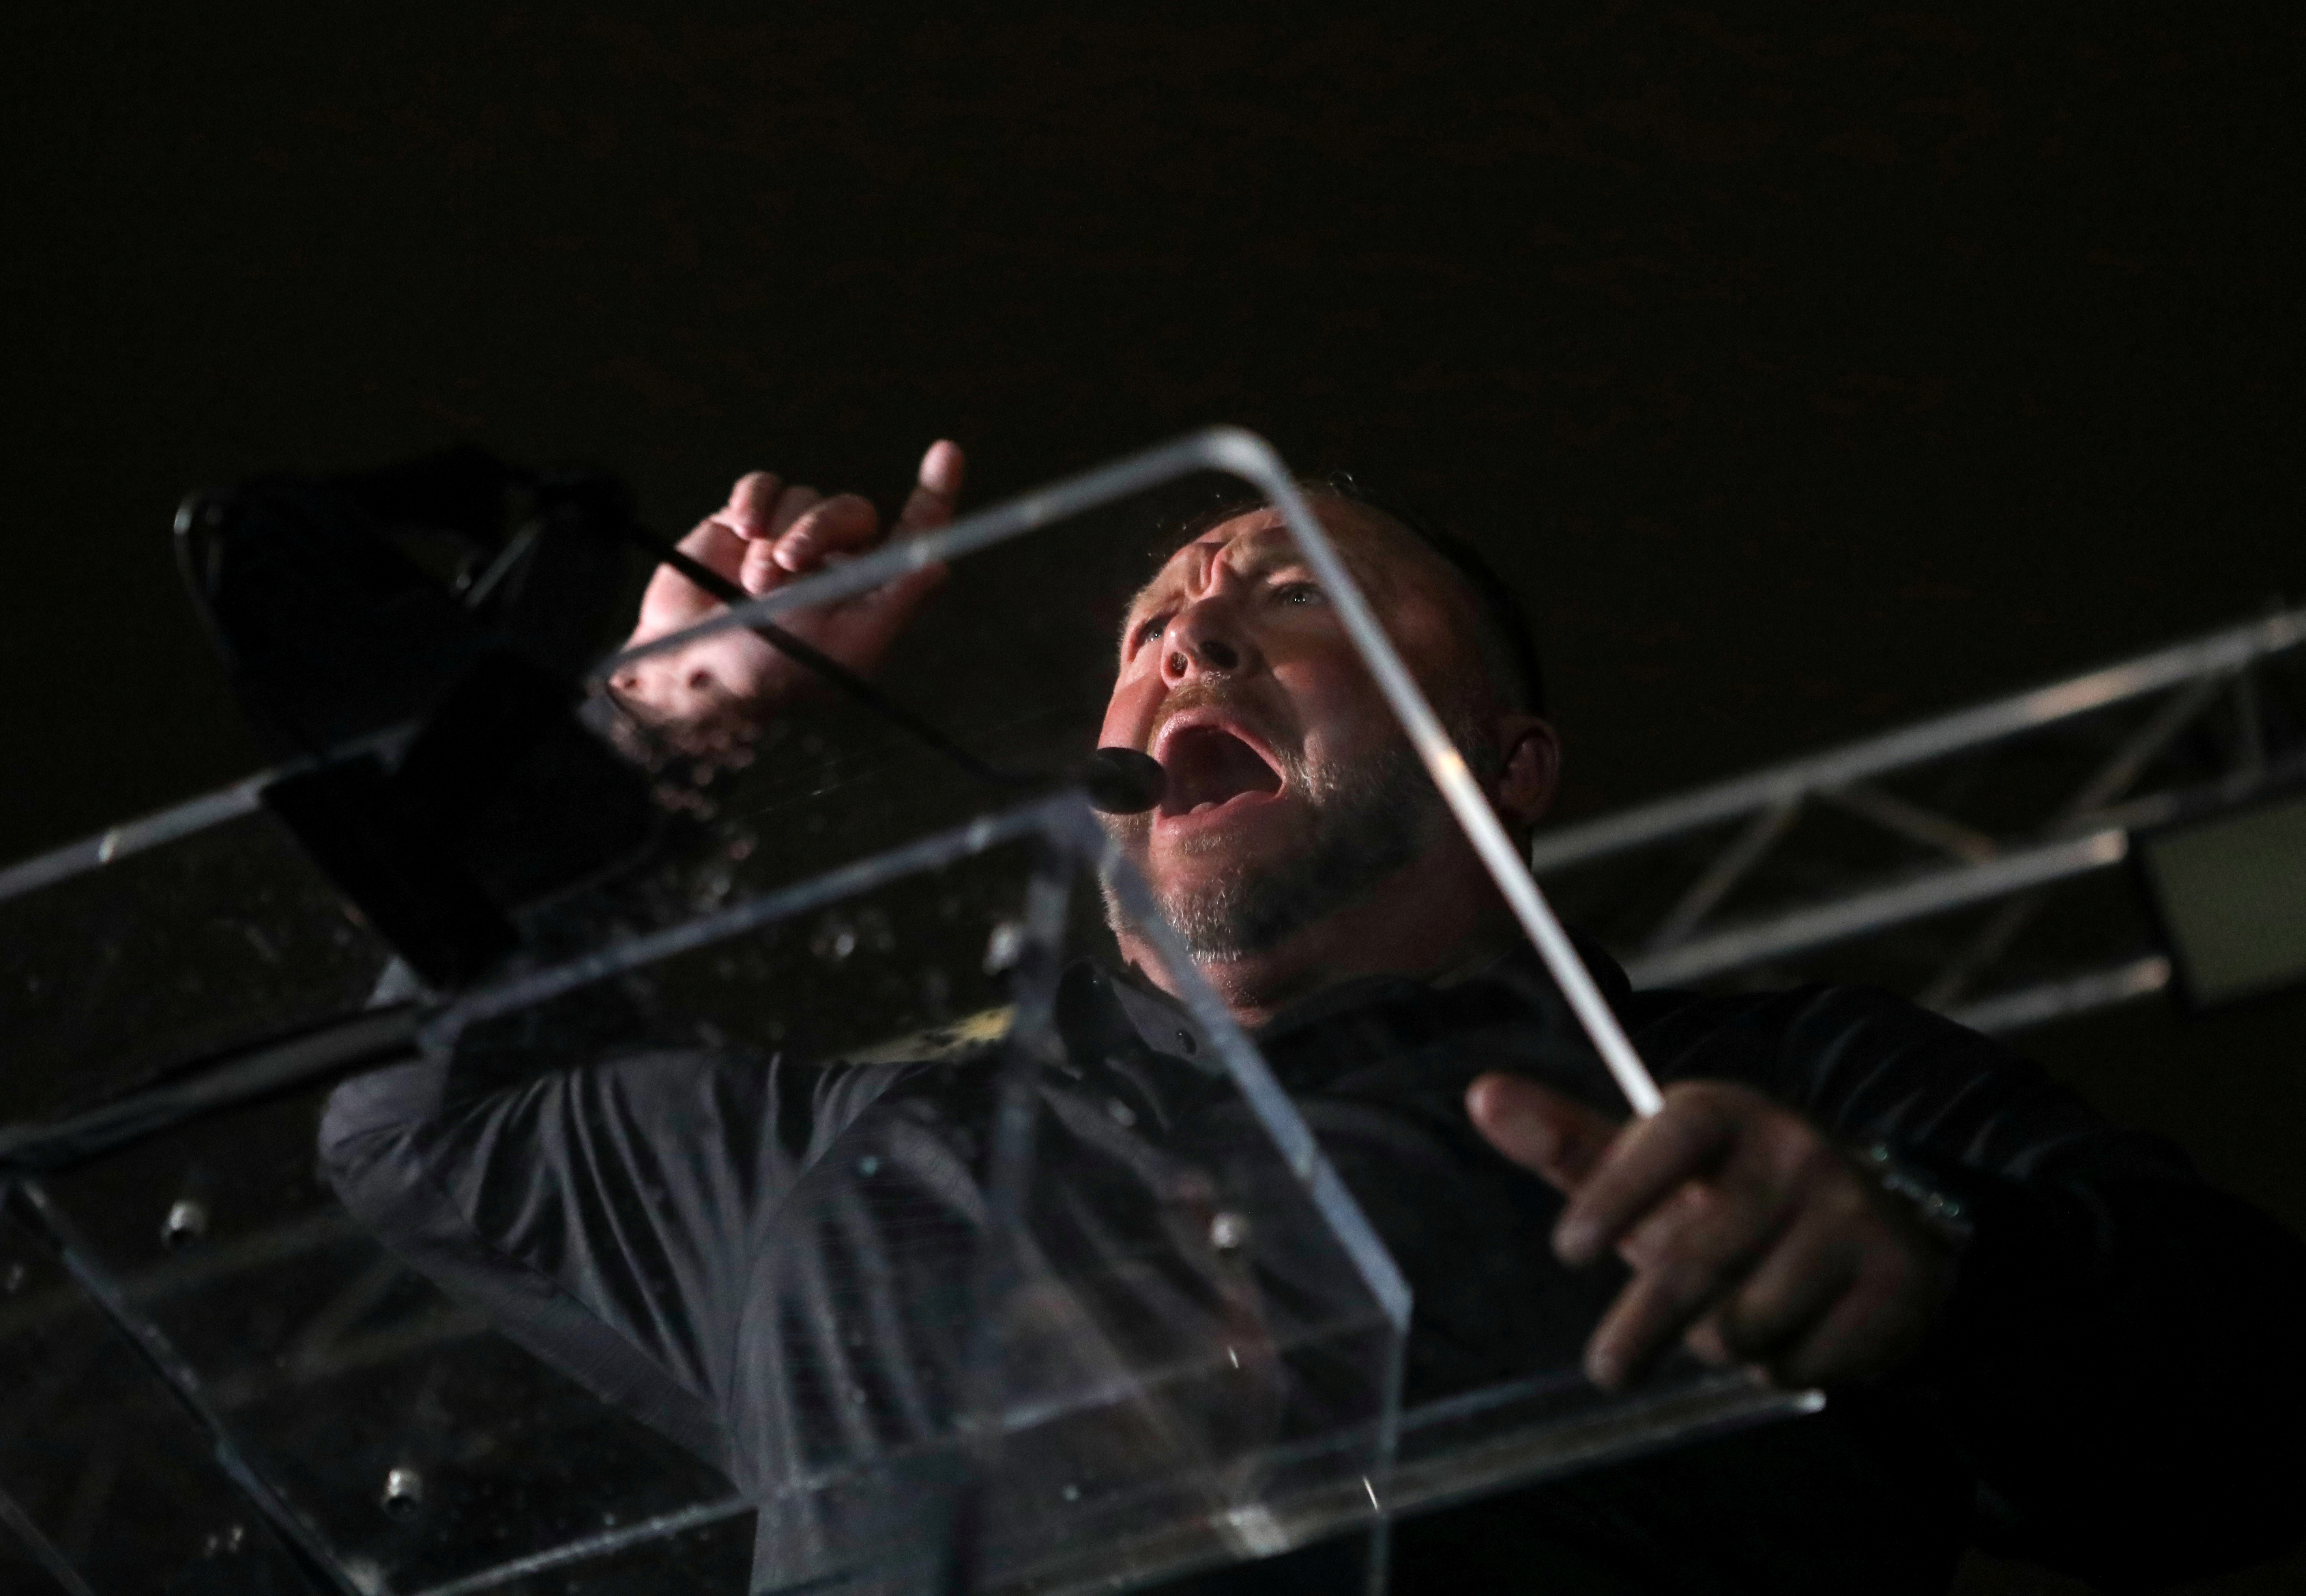 Right-wing radio talk show host Alex Jones speaks during a rally at Freedom Plaza, ahead of the U.S. Congress certification of the November 2020 election results, during protests in Washington, U.S., January 5, 2021. REUTERS/Jim Urquhart